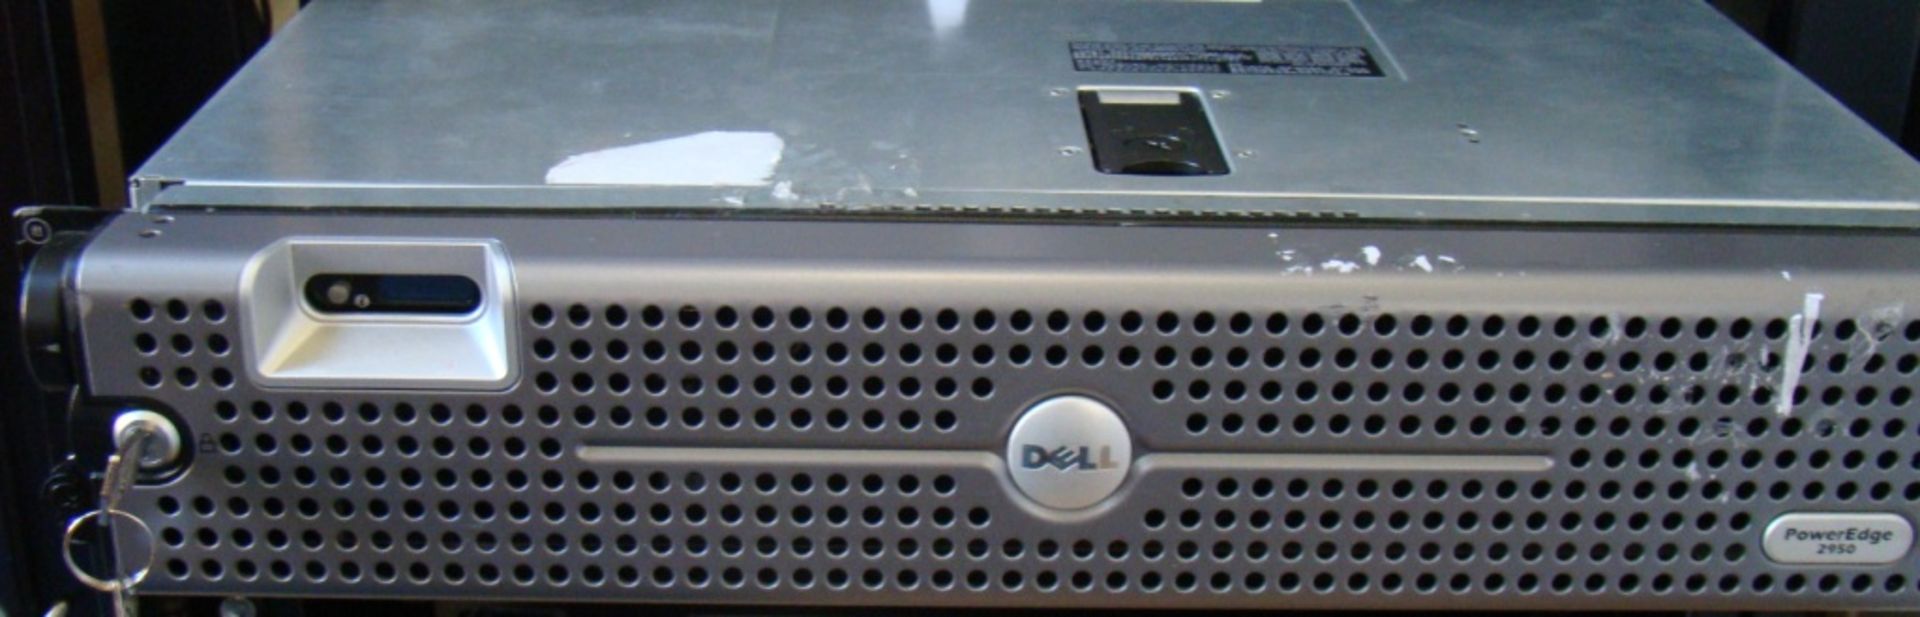 Dell 2950 PowerEdge 4 * Intel Xeon CPU 5130 @ 2.00Ghz 8GB 667 Mhz, 1 x 73.8 GB HDD + Windo - Image 9 of 9